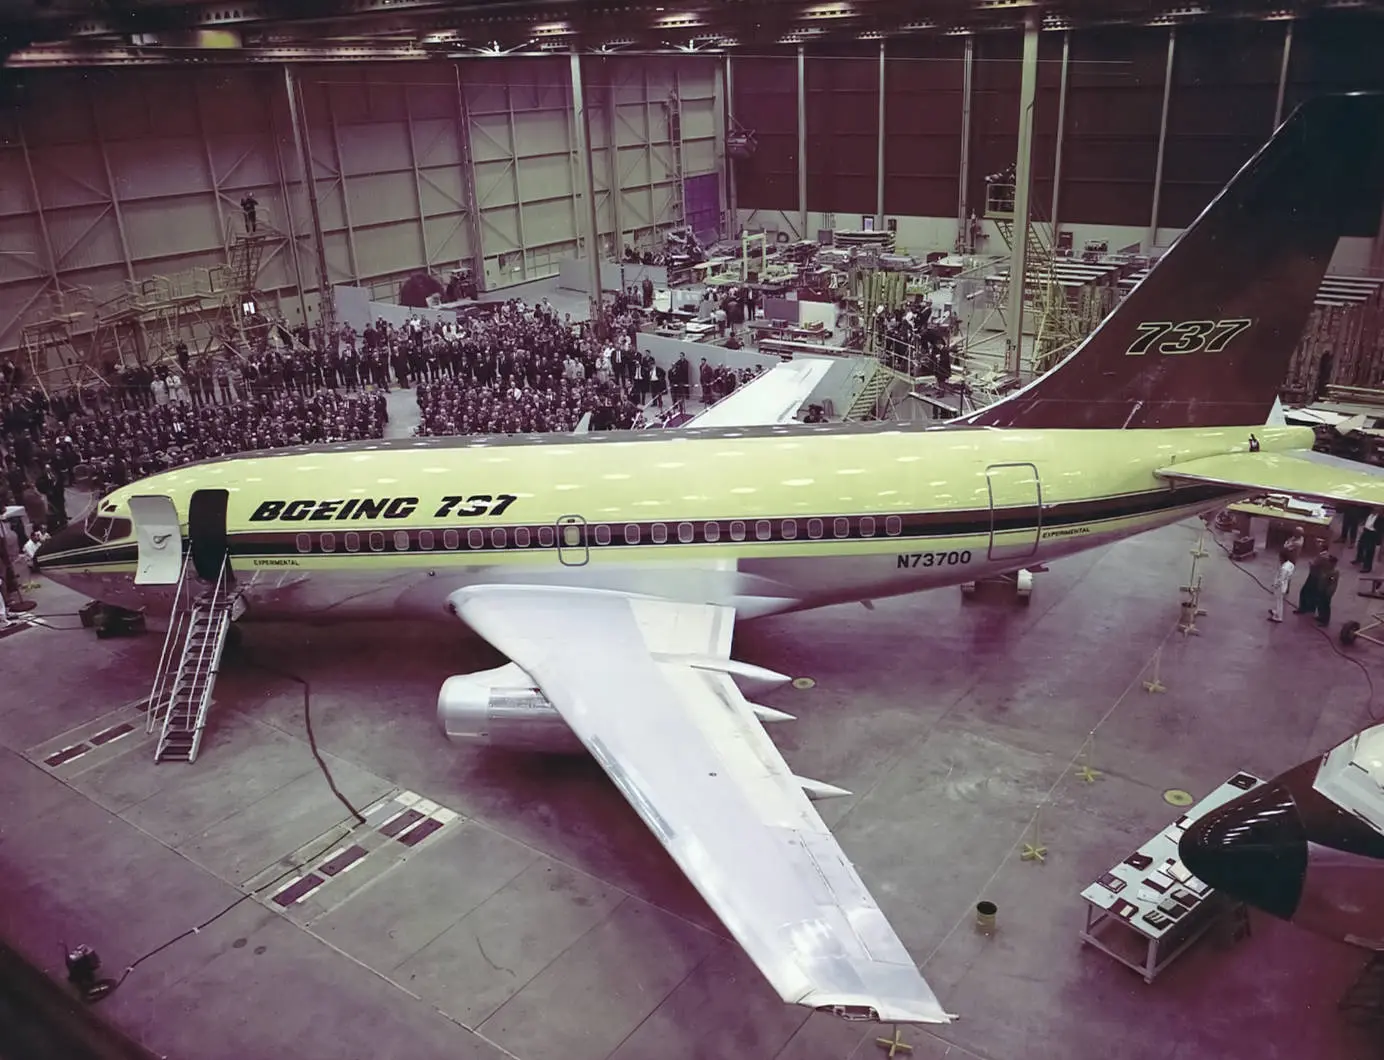 The first Boeing 737 happened in 1967